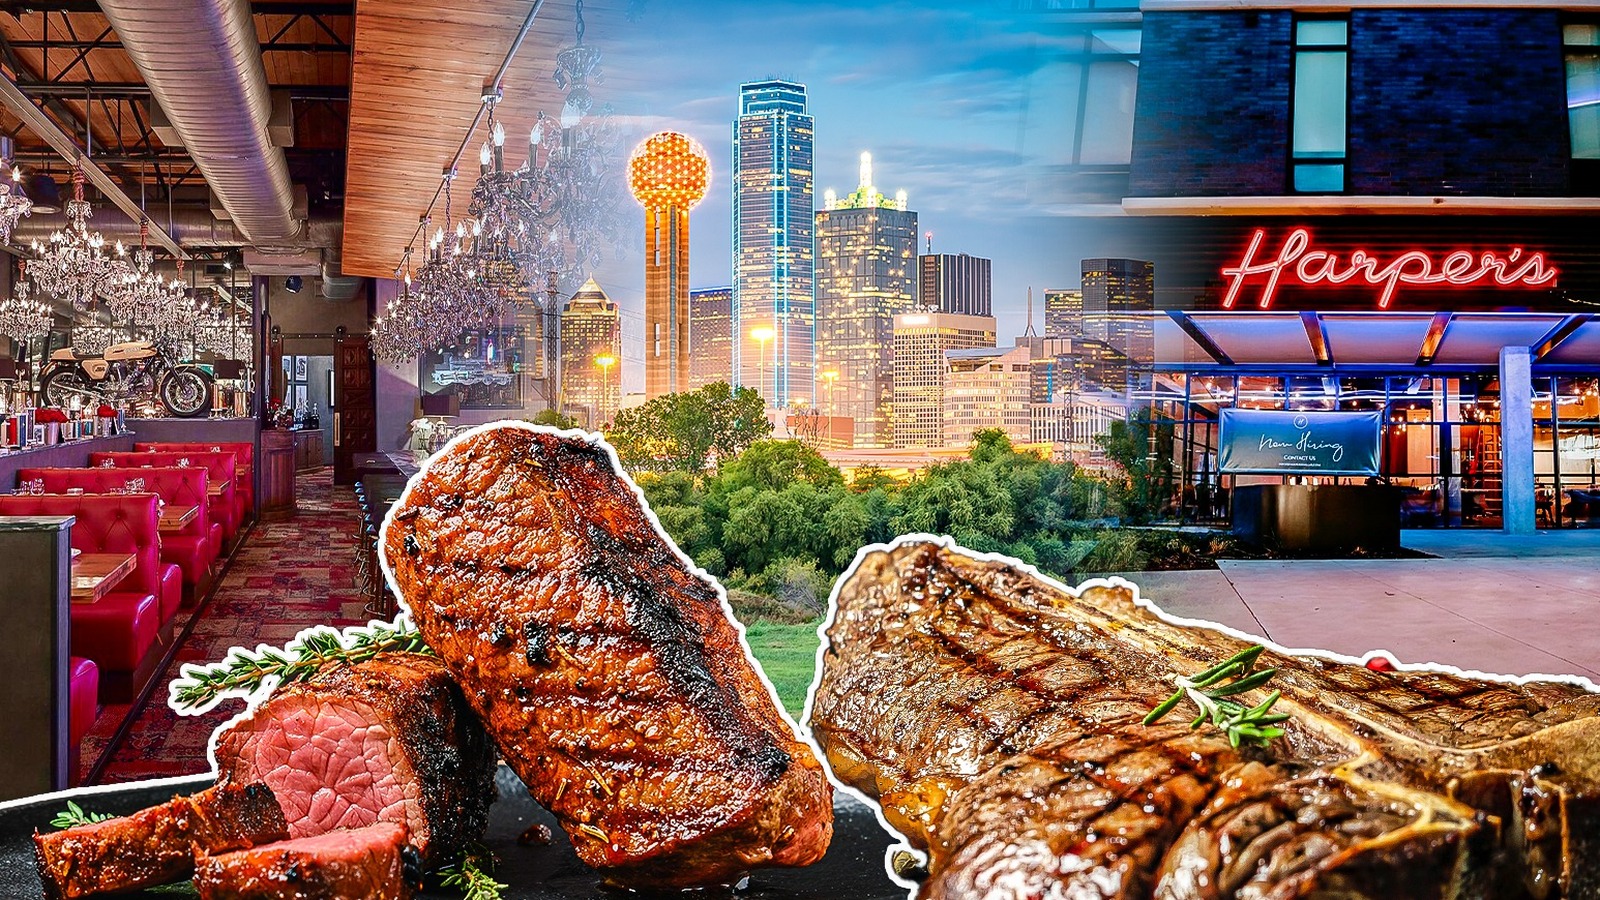 American Airlines, Dallas Mavericks and Nick & Sam's Steakhouse